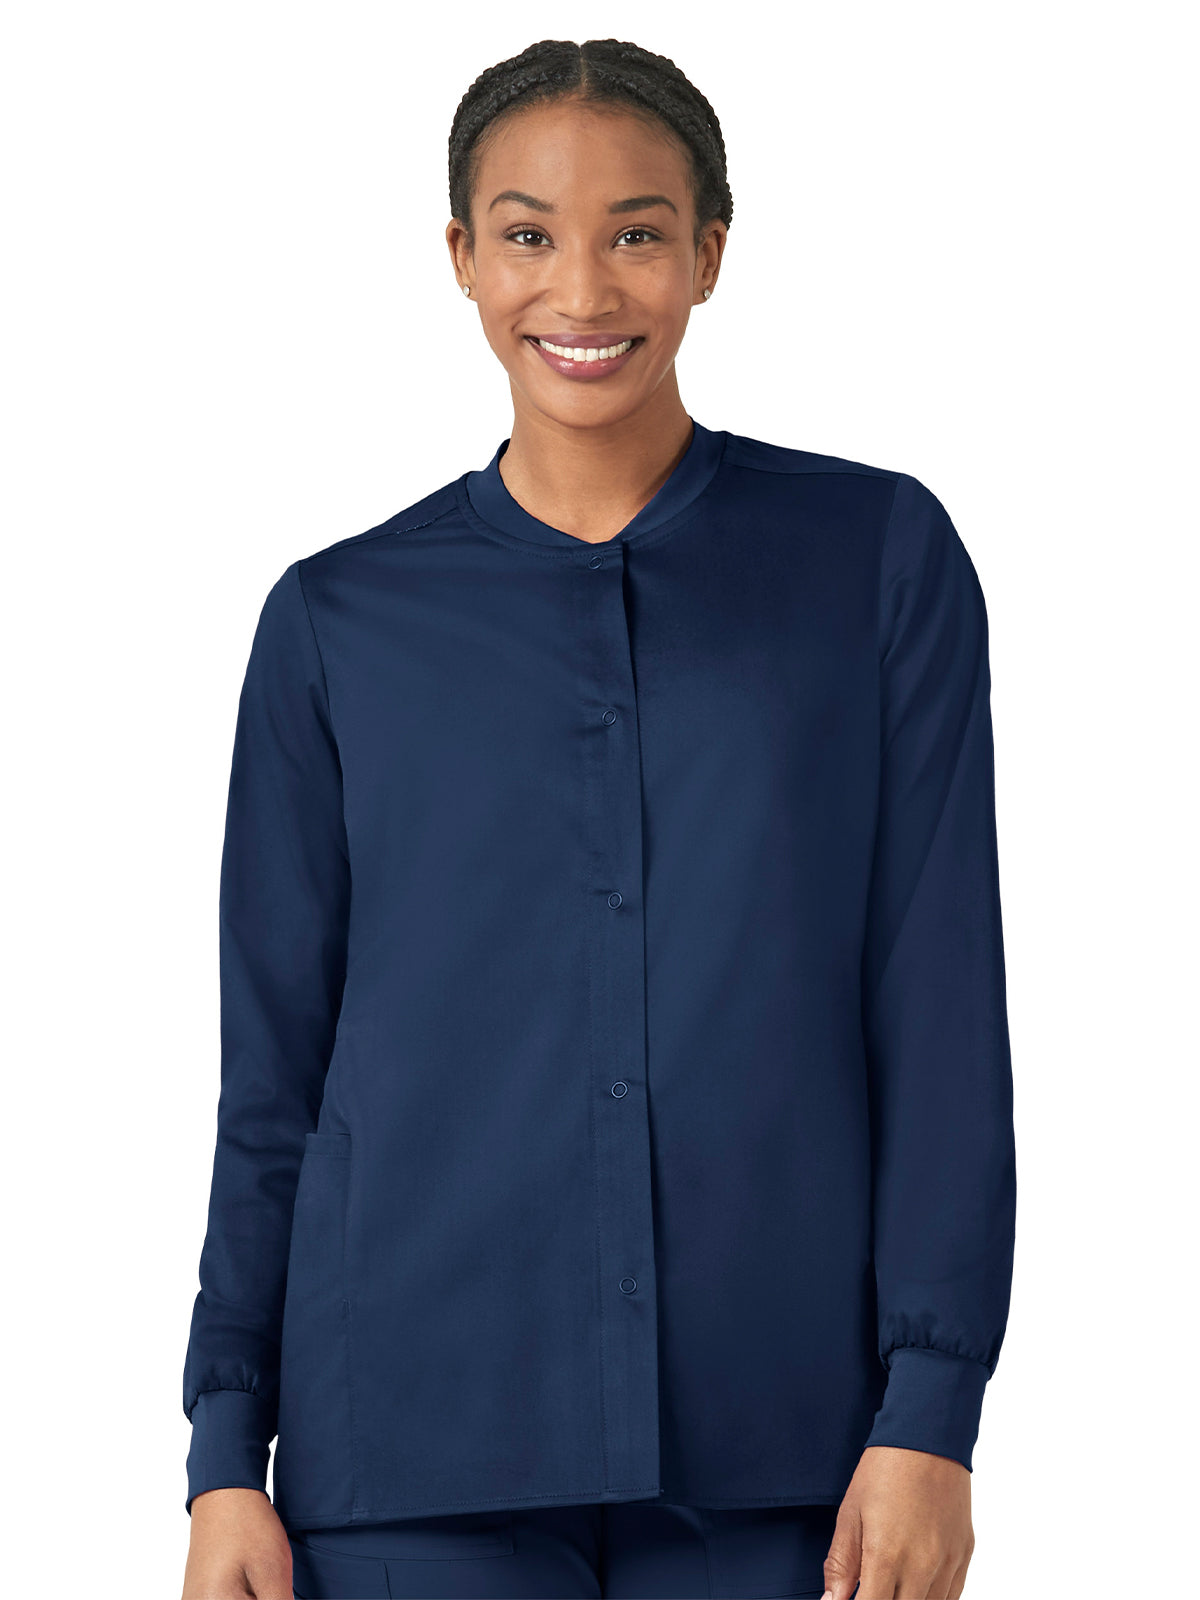 Women's Snap-Front Warm-Up Jacket - 8219 - Navy